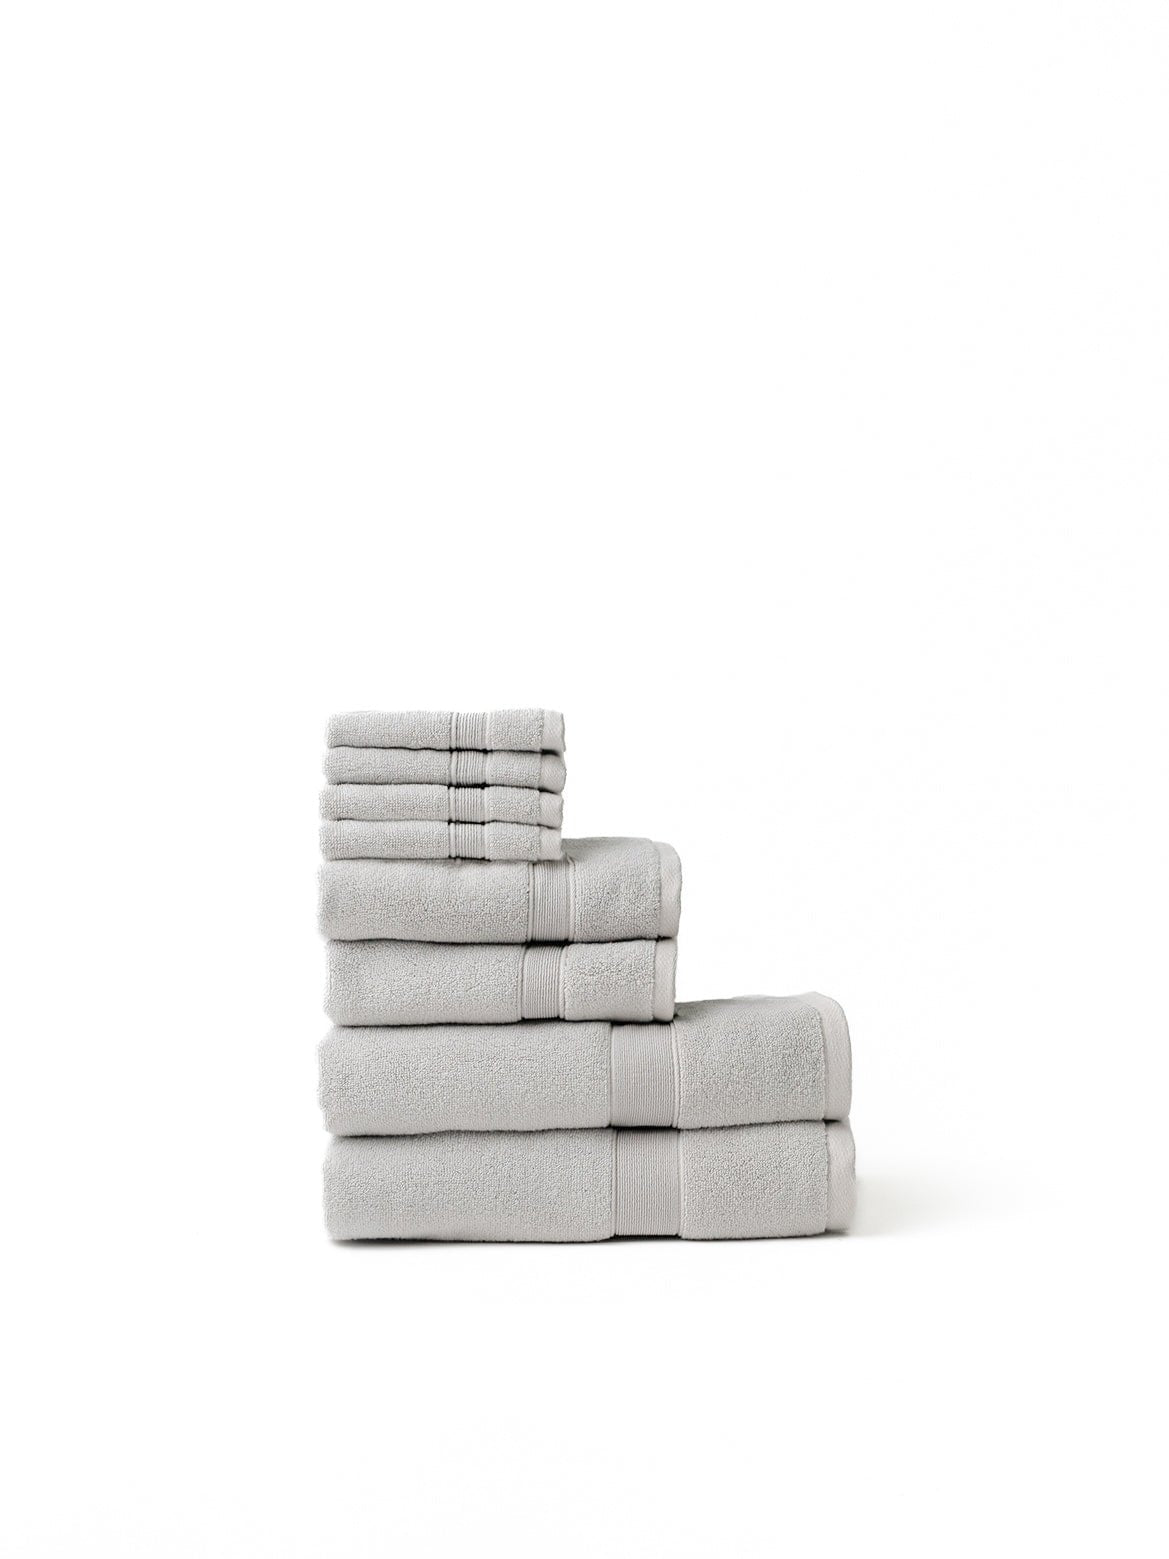 Light grey luxe bath towel set folded with white background |Color:Light Grey